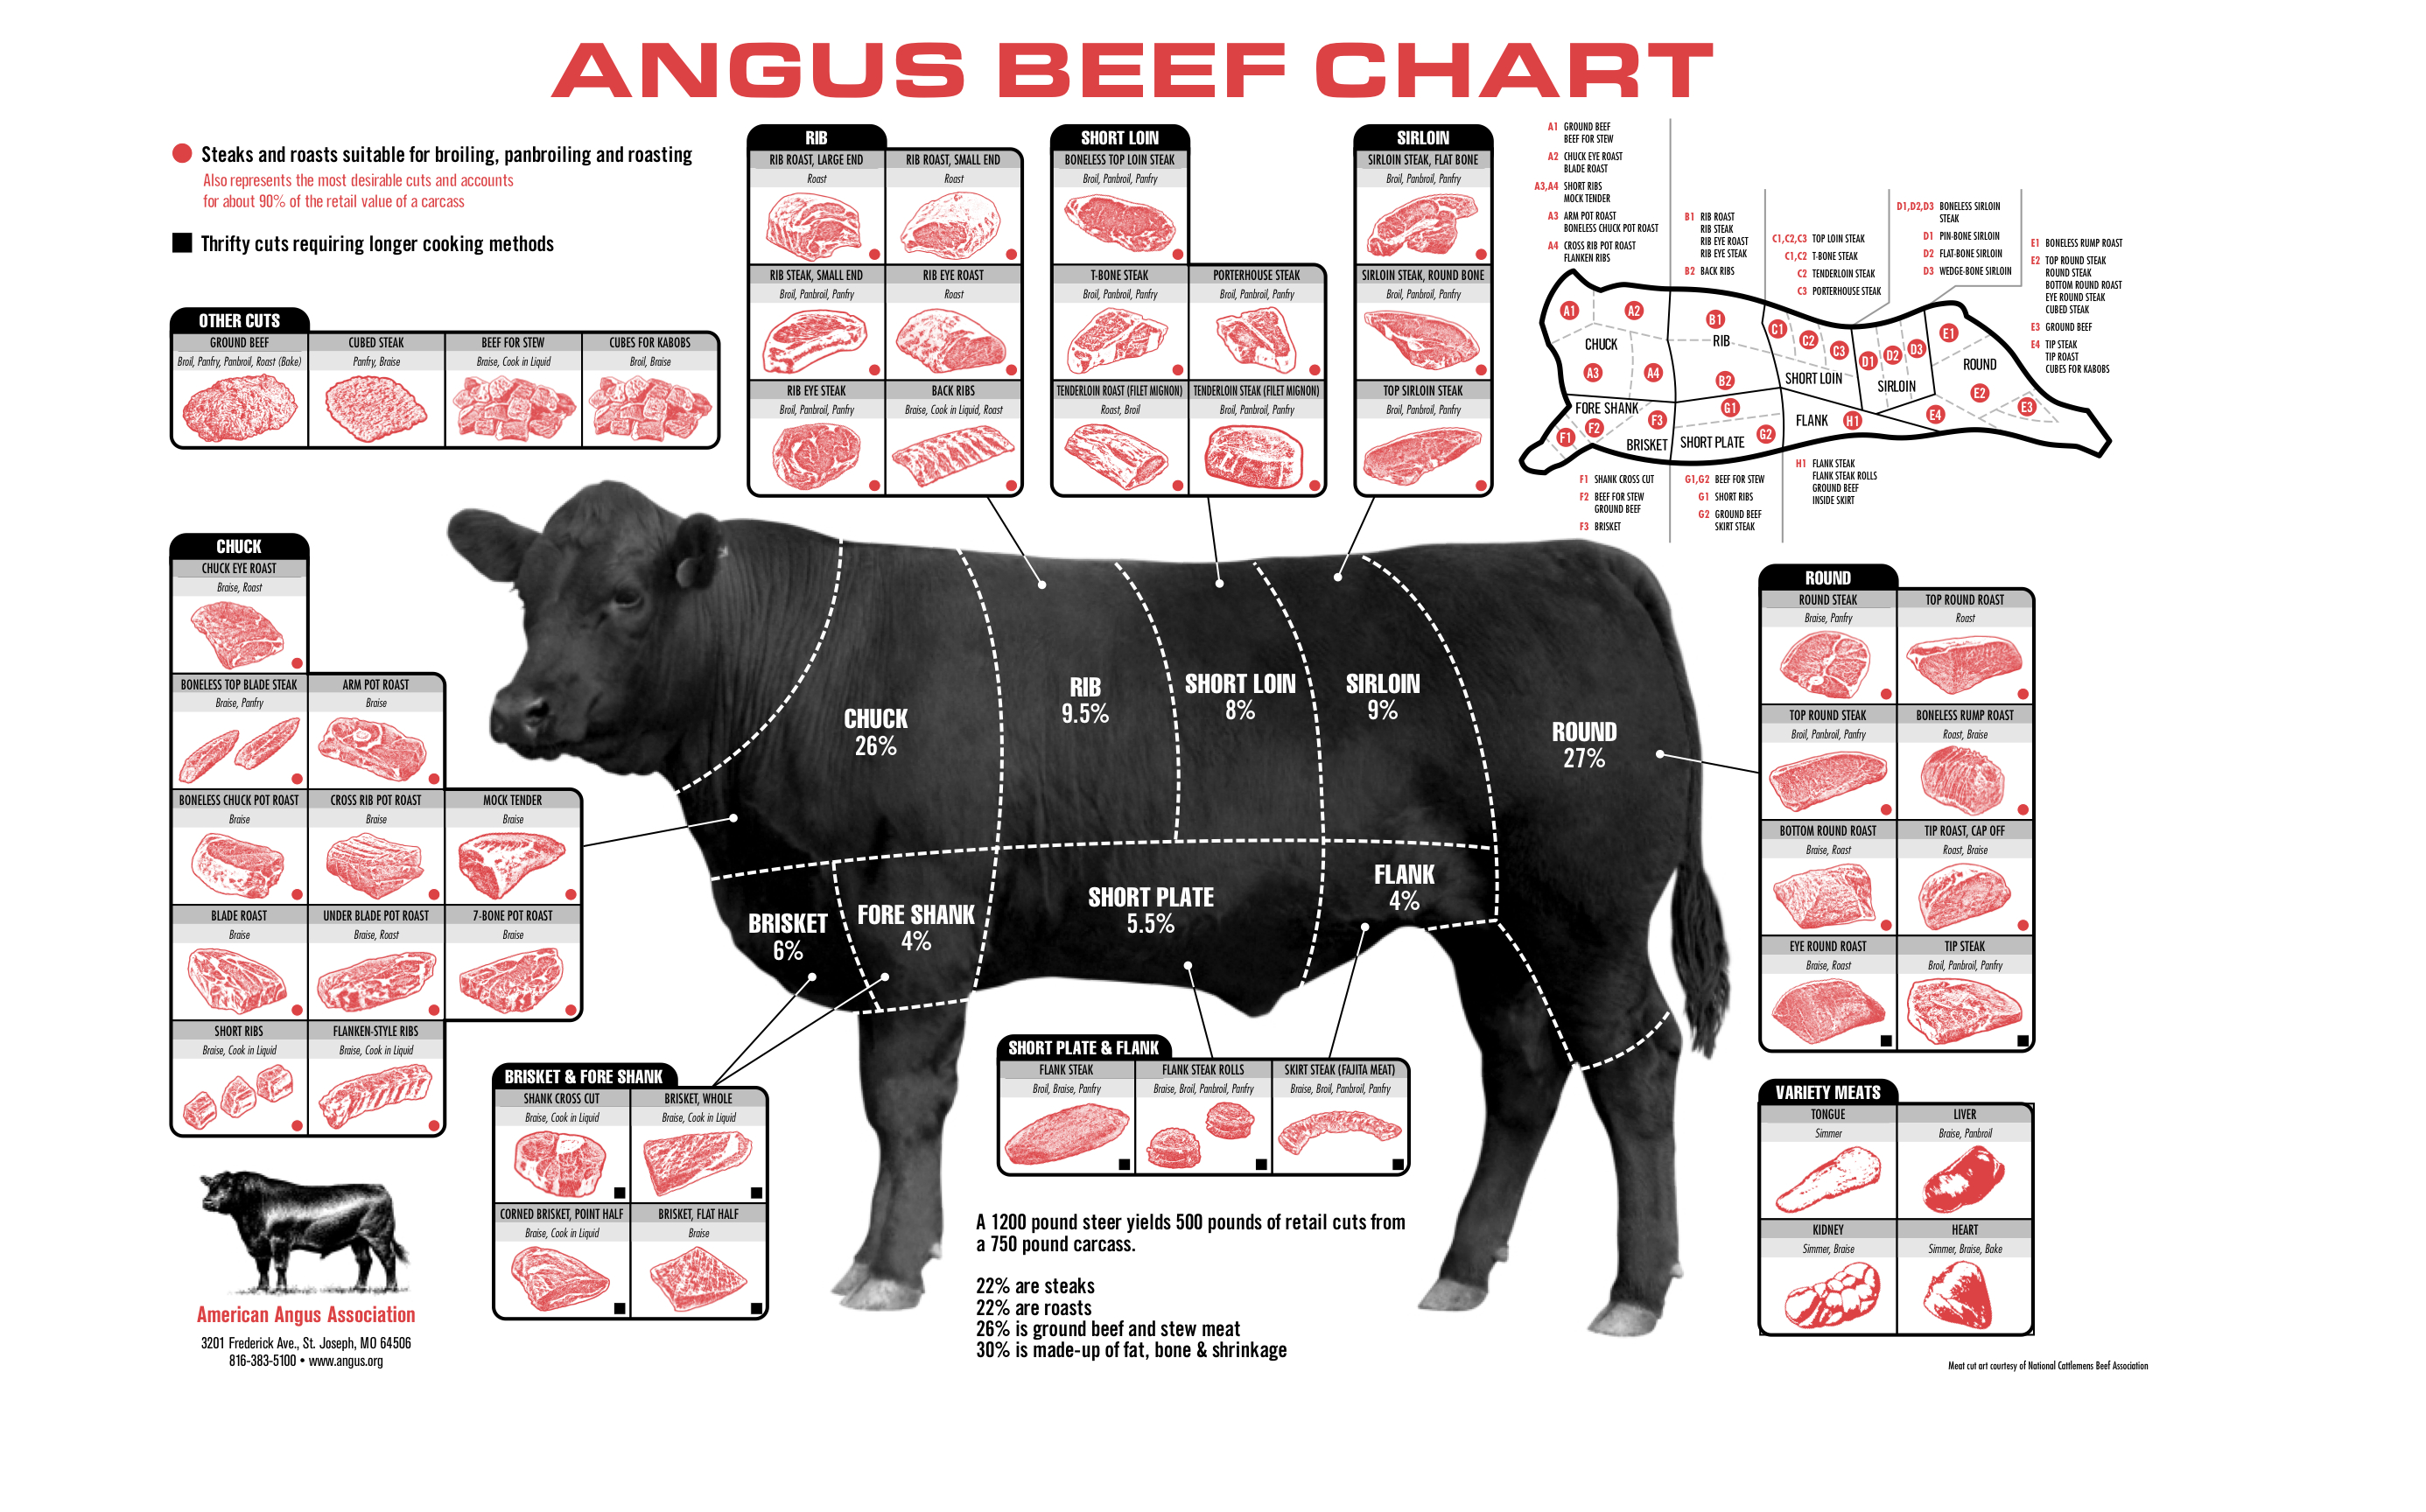 Angus Beef Chart [2,772px × 1,728px] (xpost from /r/VeryLargeImages